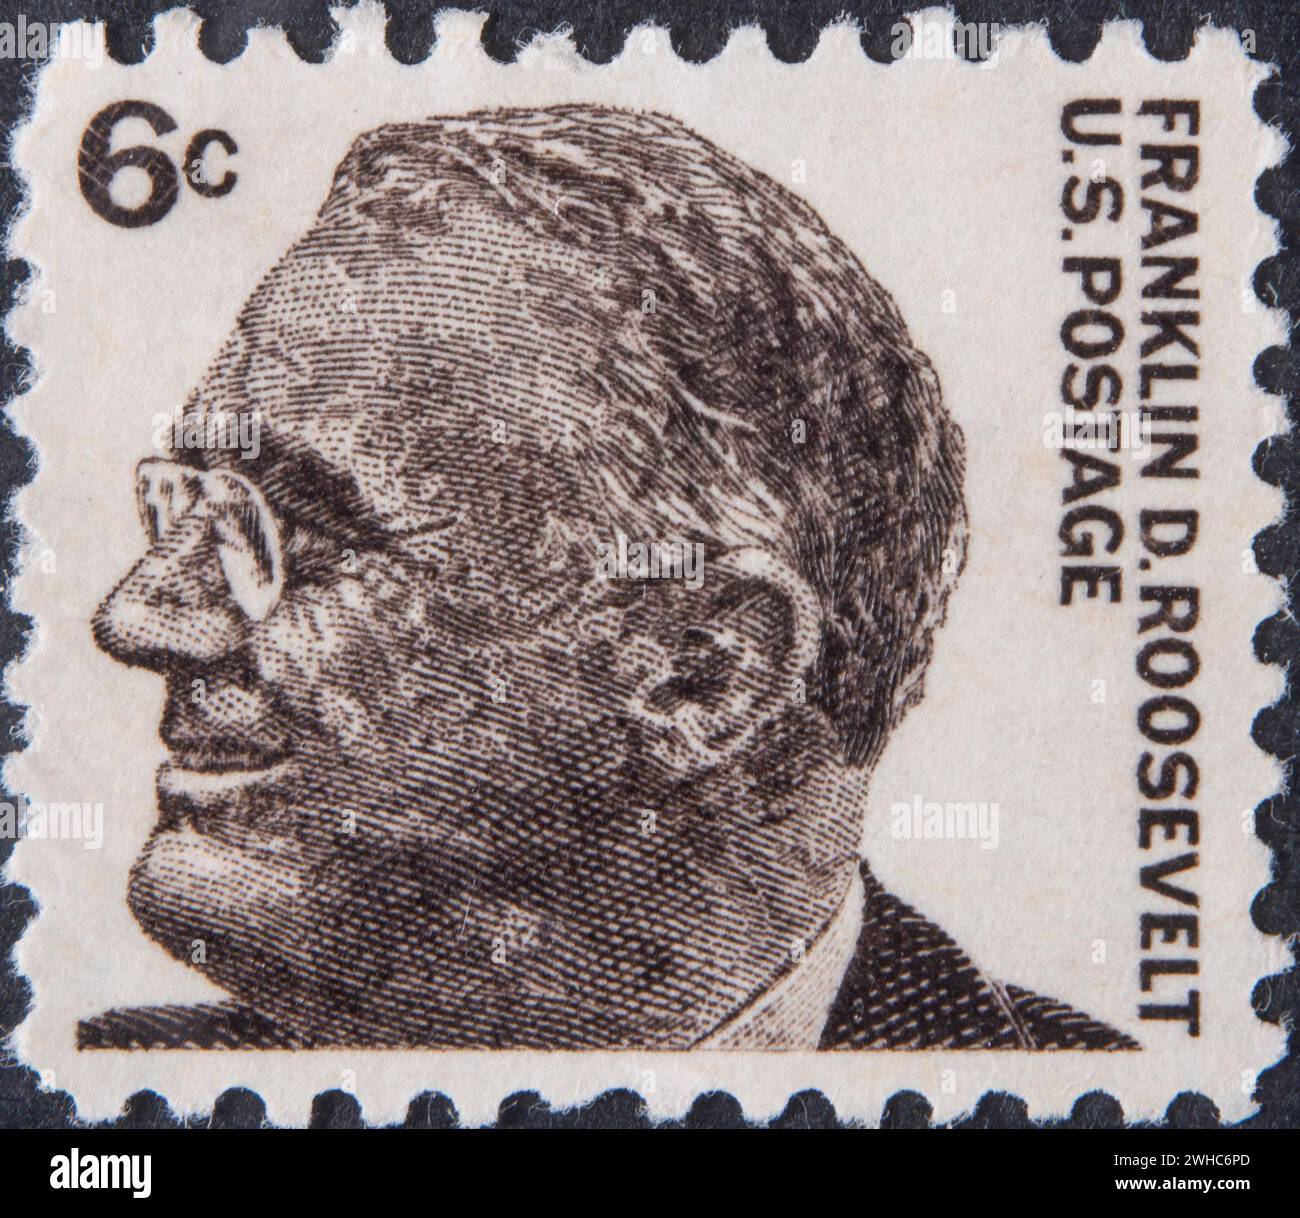 Franklin Delano Roosevelt, 1882, 1945, 32nd President of the United States 1933, 1945. Portrait on US postage stamp Stock Photo